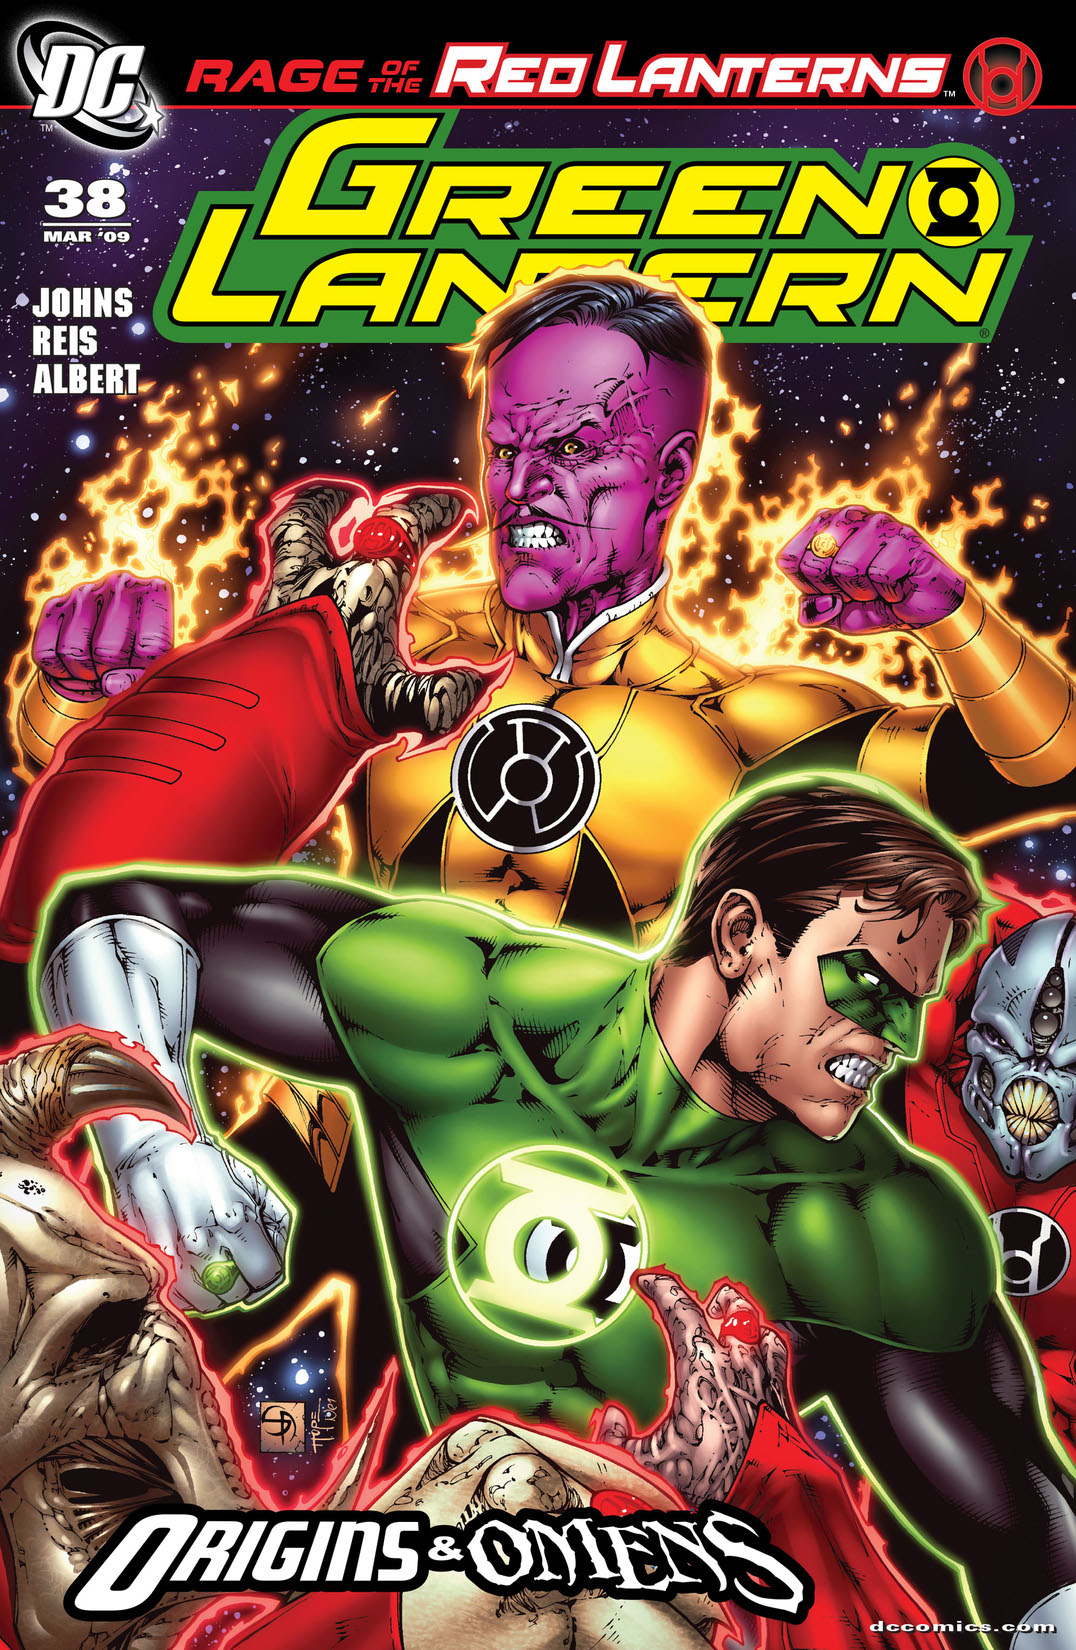 Green Lantern (2005-) #38 preview images